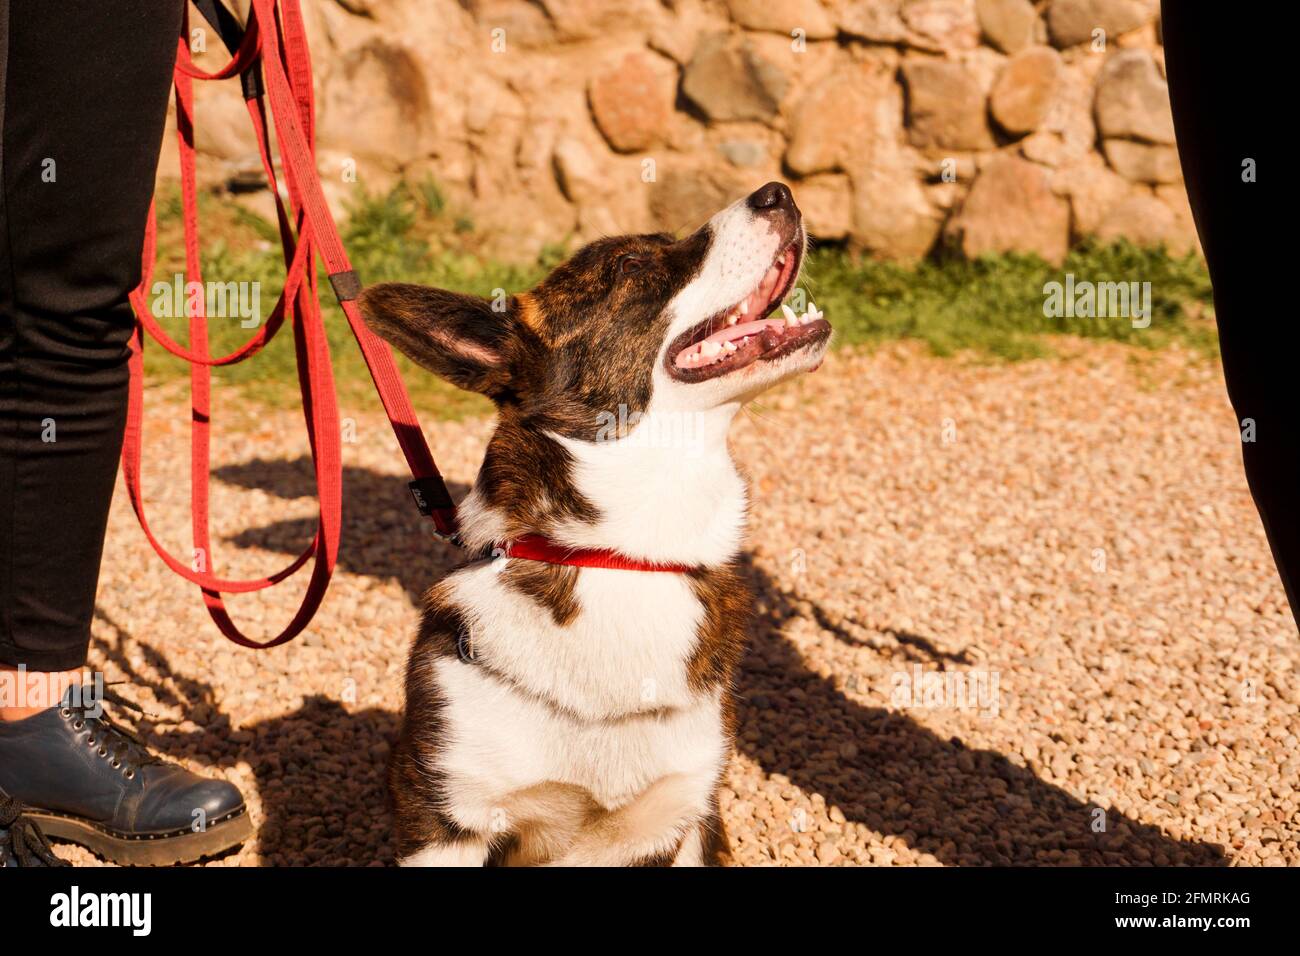 Brown corgi on a leash on the sand. Walk on a sunny day. Happy pet. Walk or dog show Stock Photo